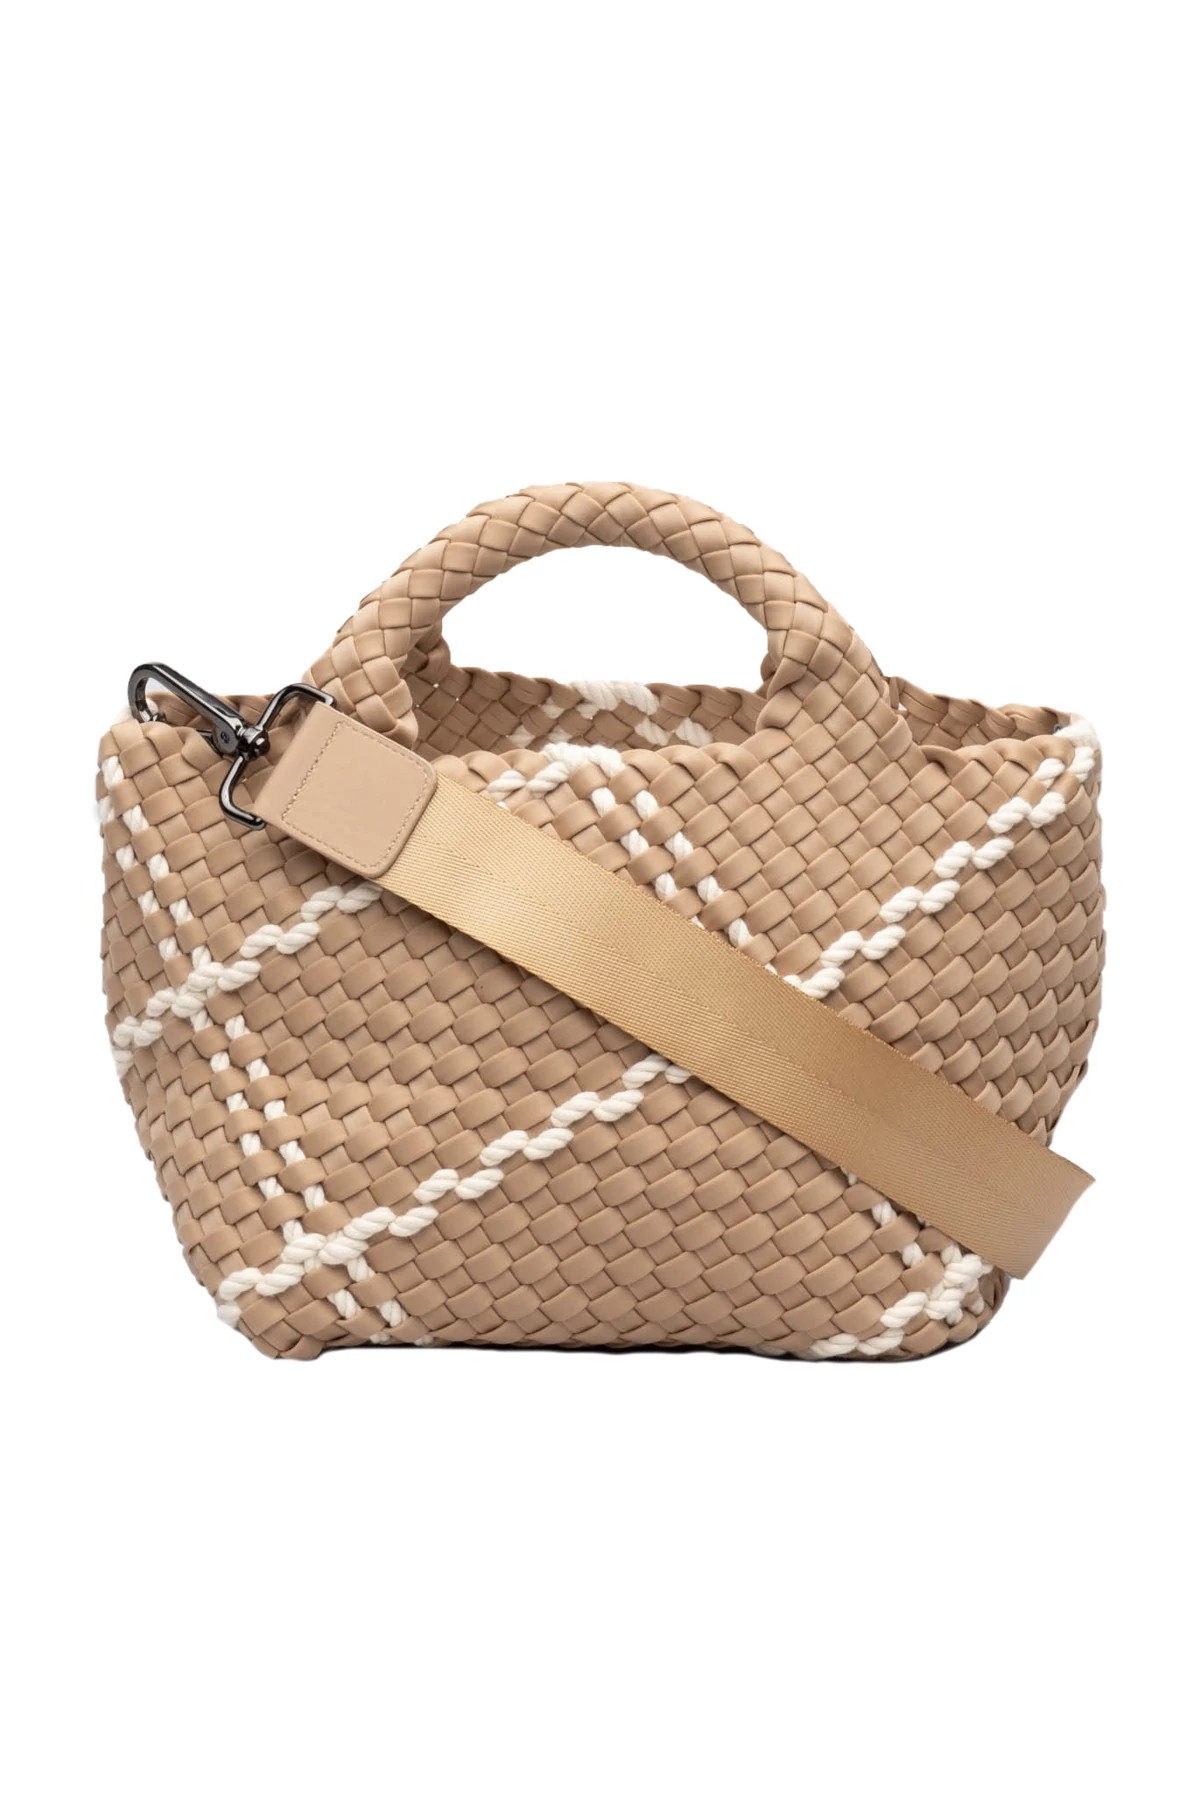 CAMEL Woven Rope Mini Tote image number 1